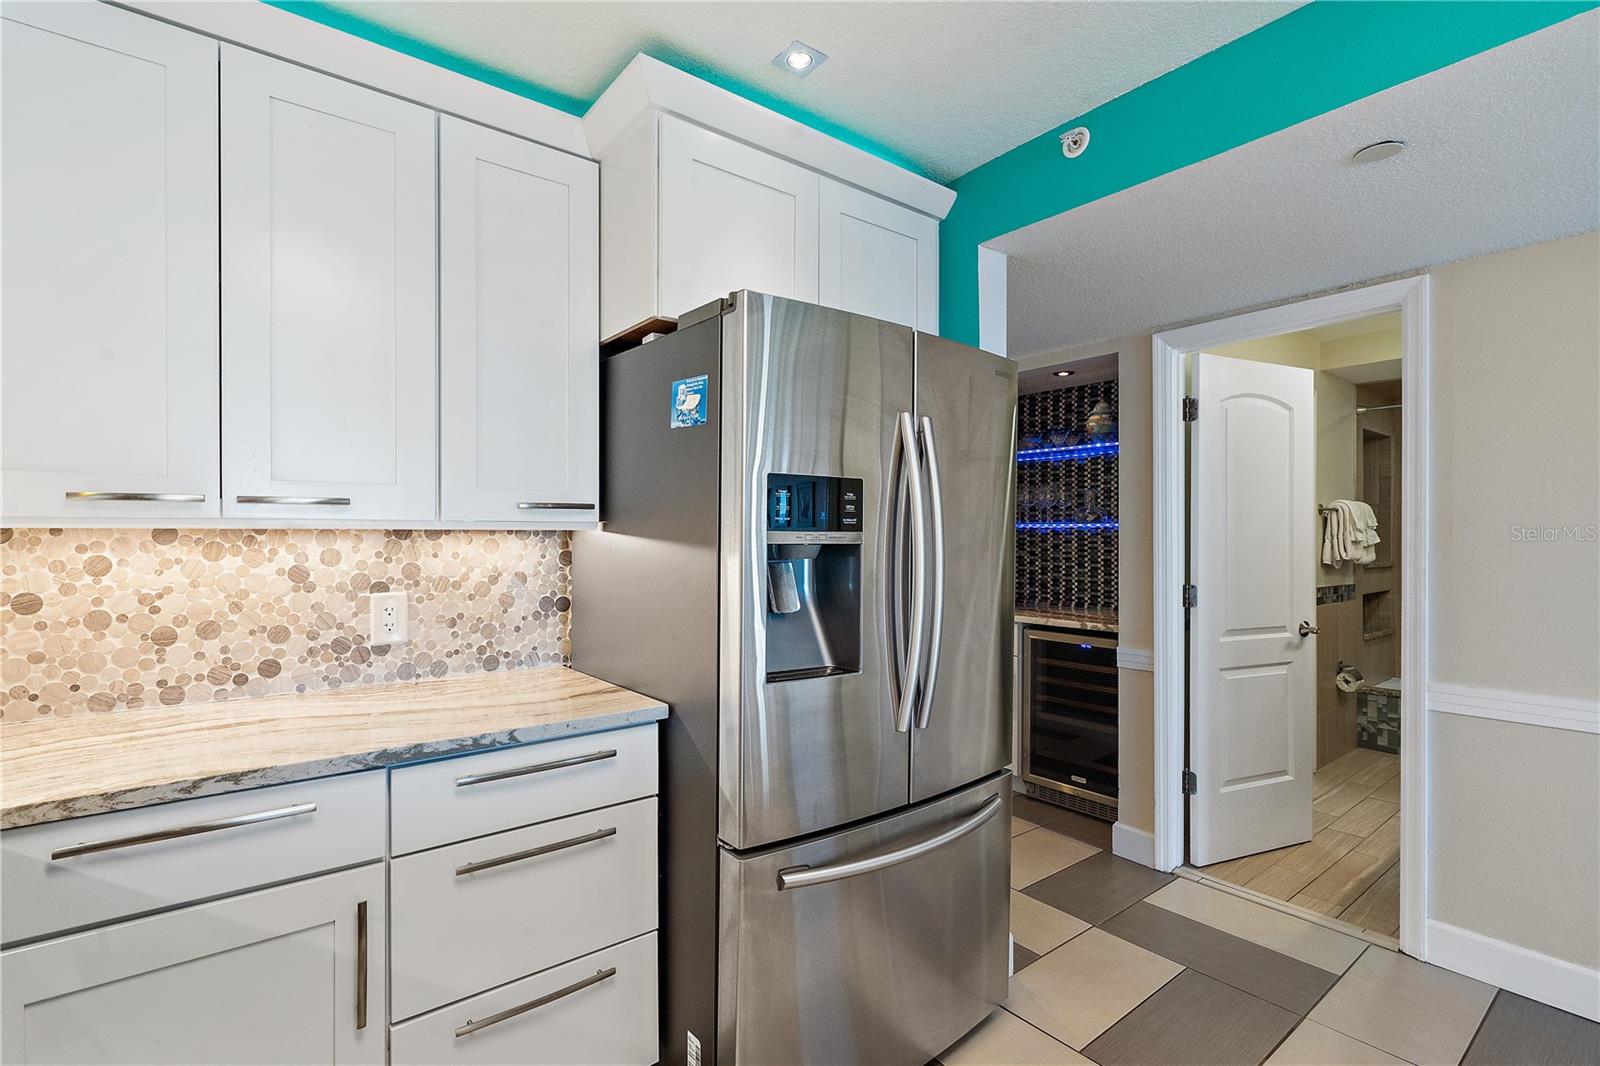 There is a closet pantry located to the left of the dry bar, out of sight. The open door leads to the second bathroom. Other features of the kitchen include a French door refrigerator, stone backsplash, and raised ceiling.